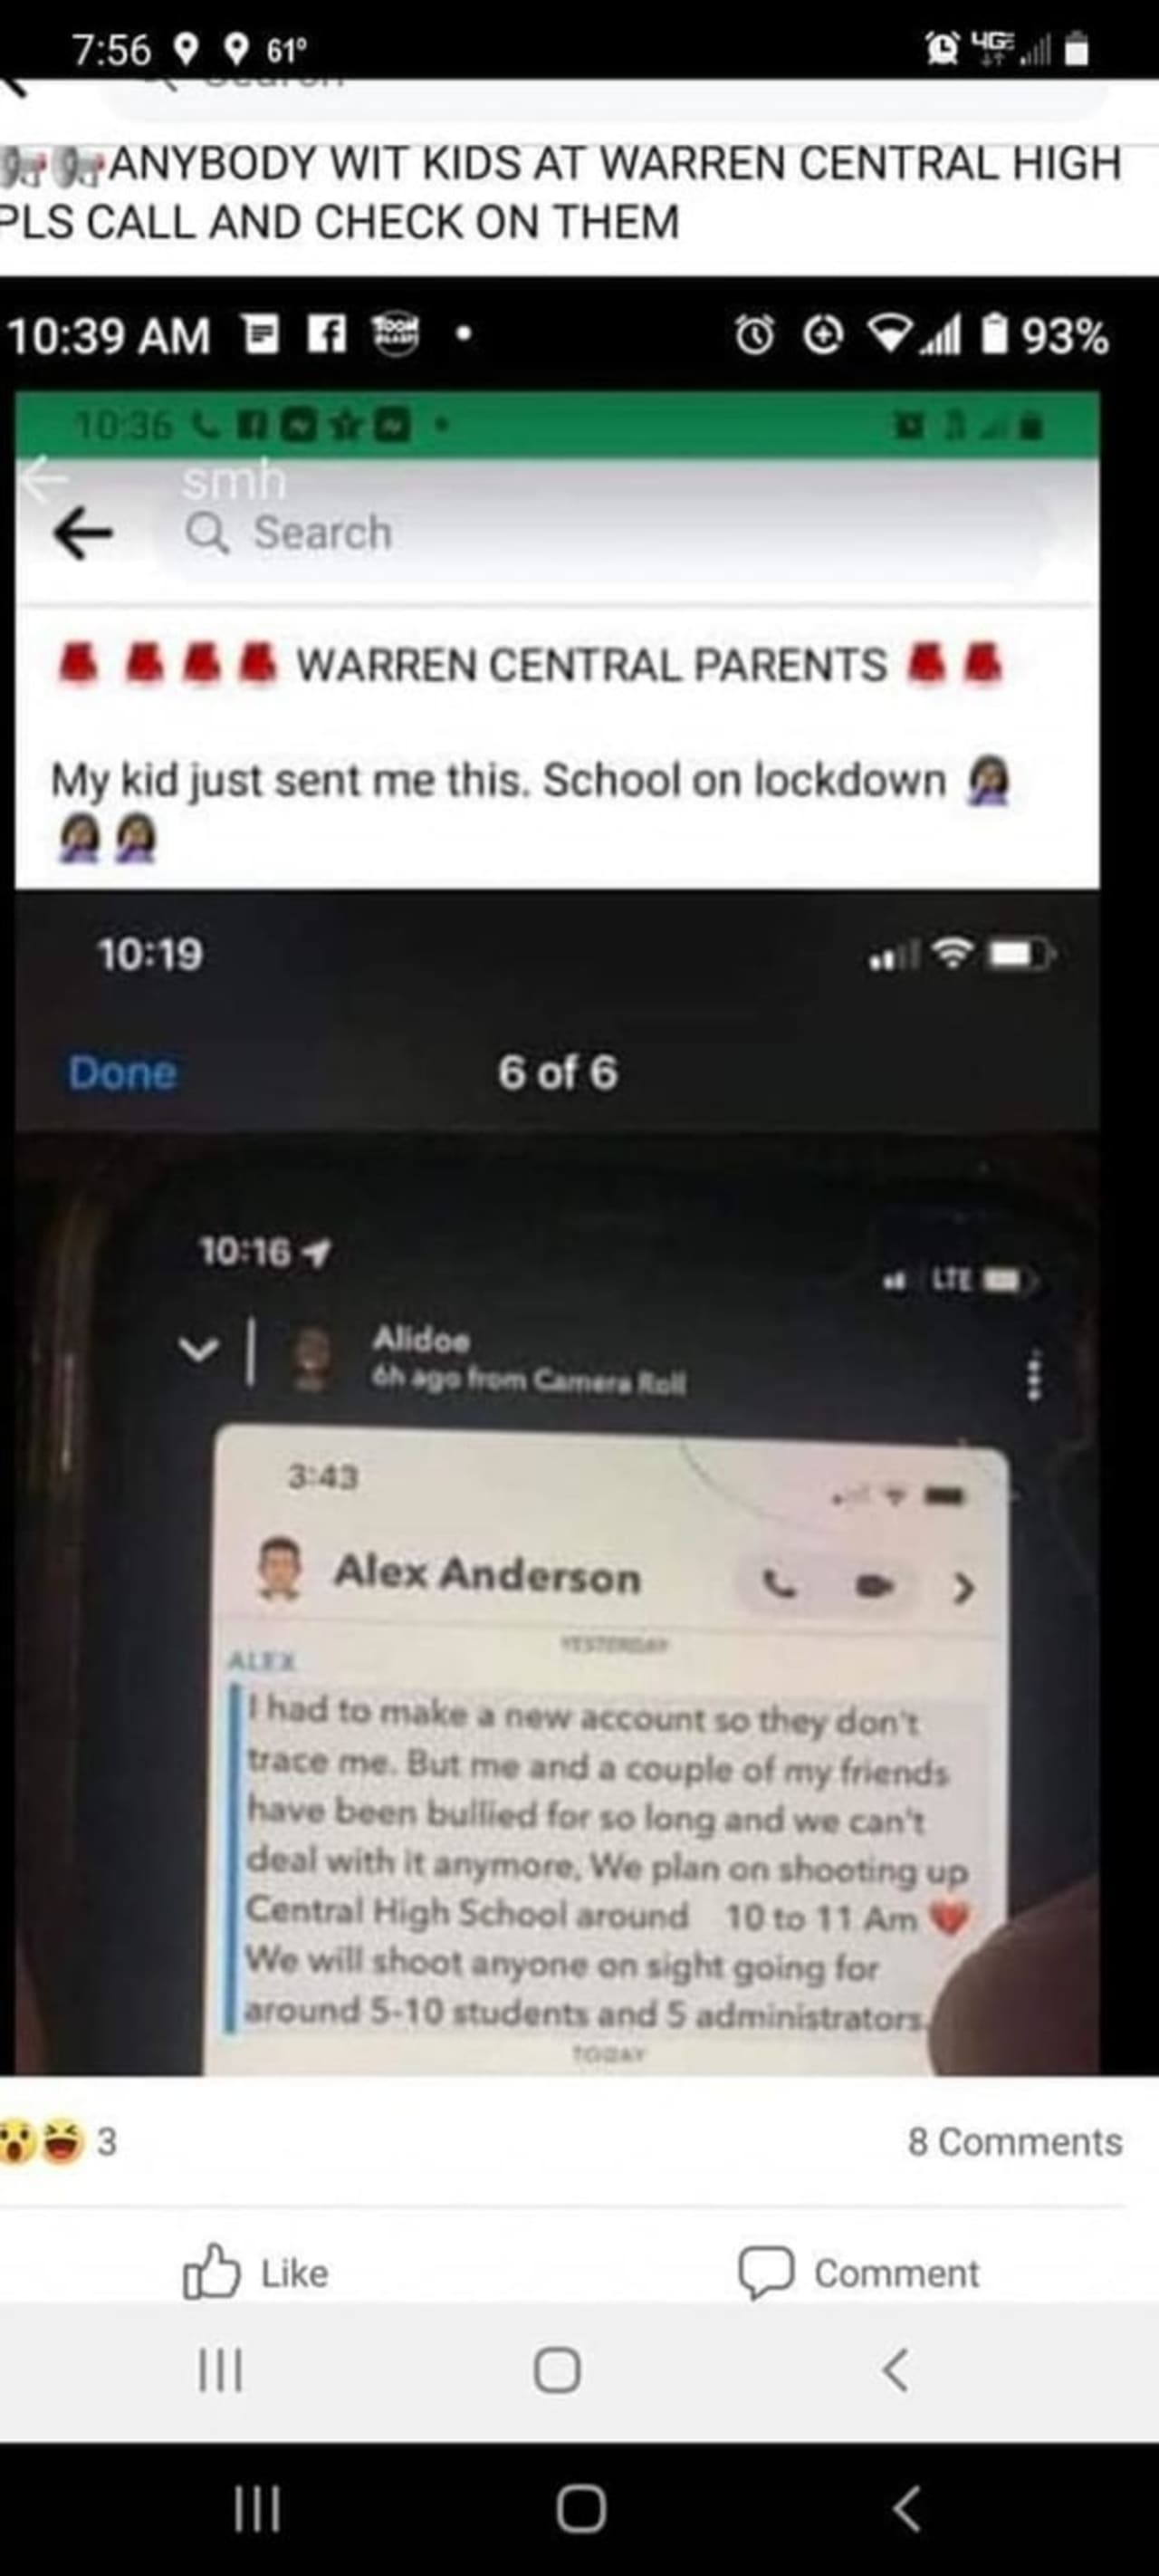 Some schools in New York upped their security after a threat made the rounds on social media.